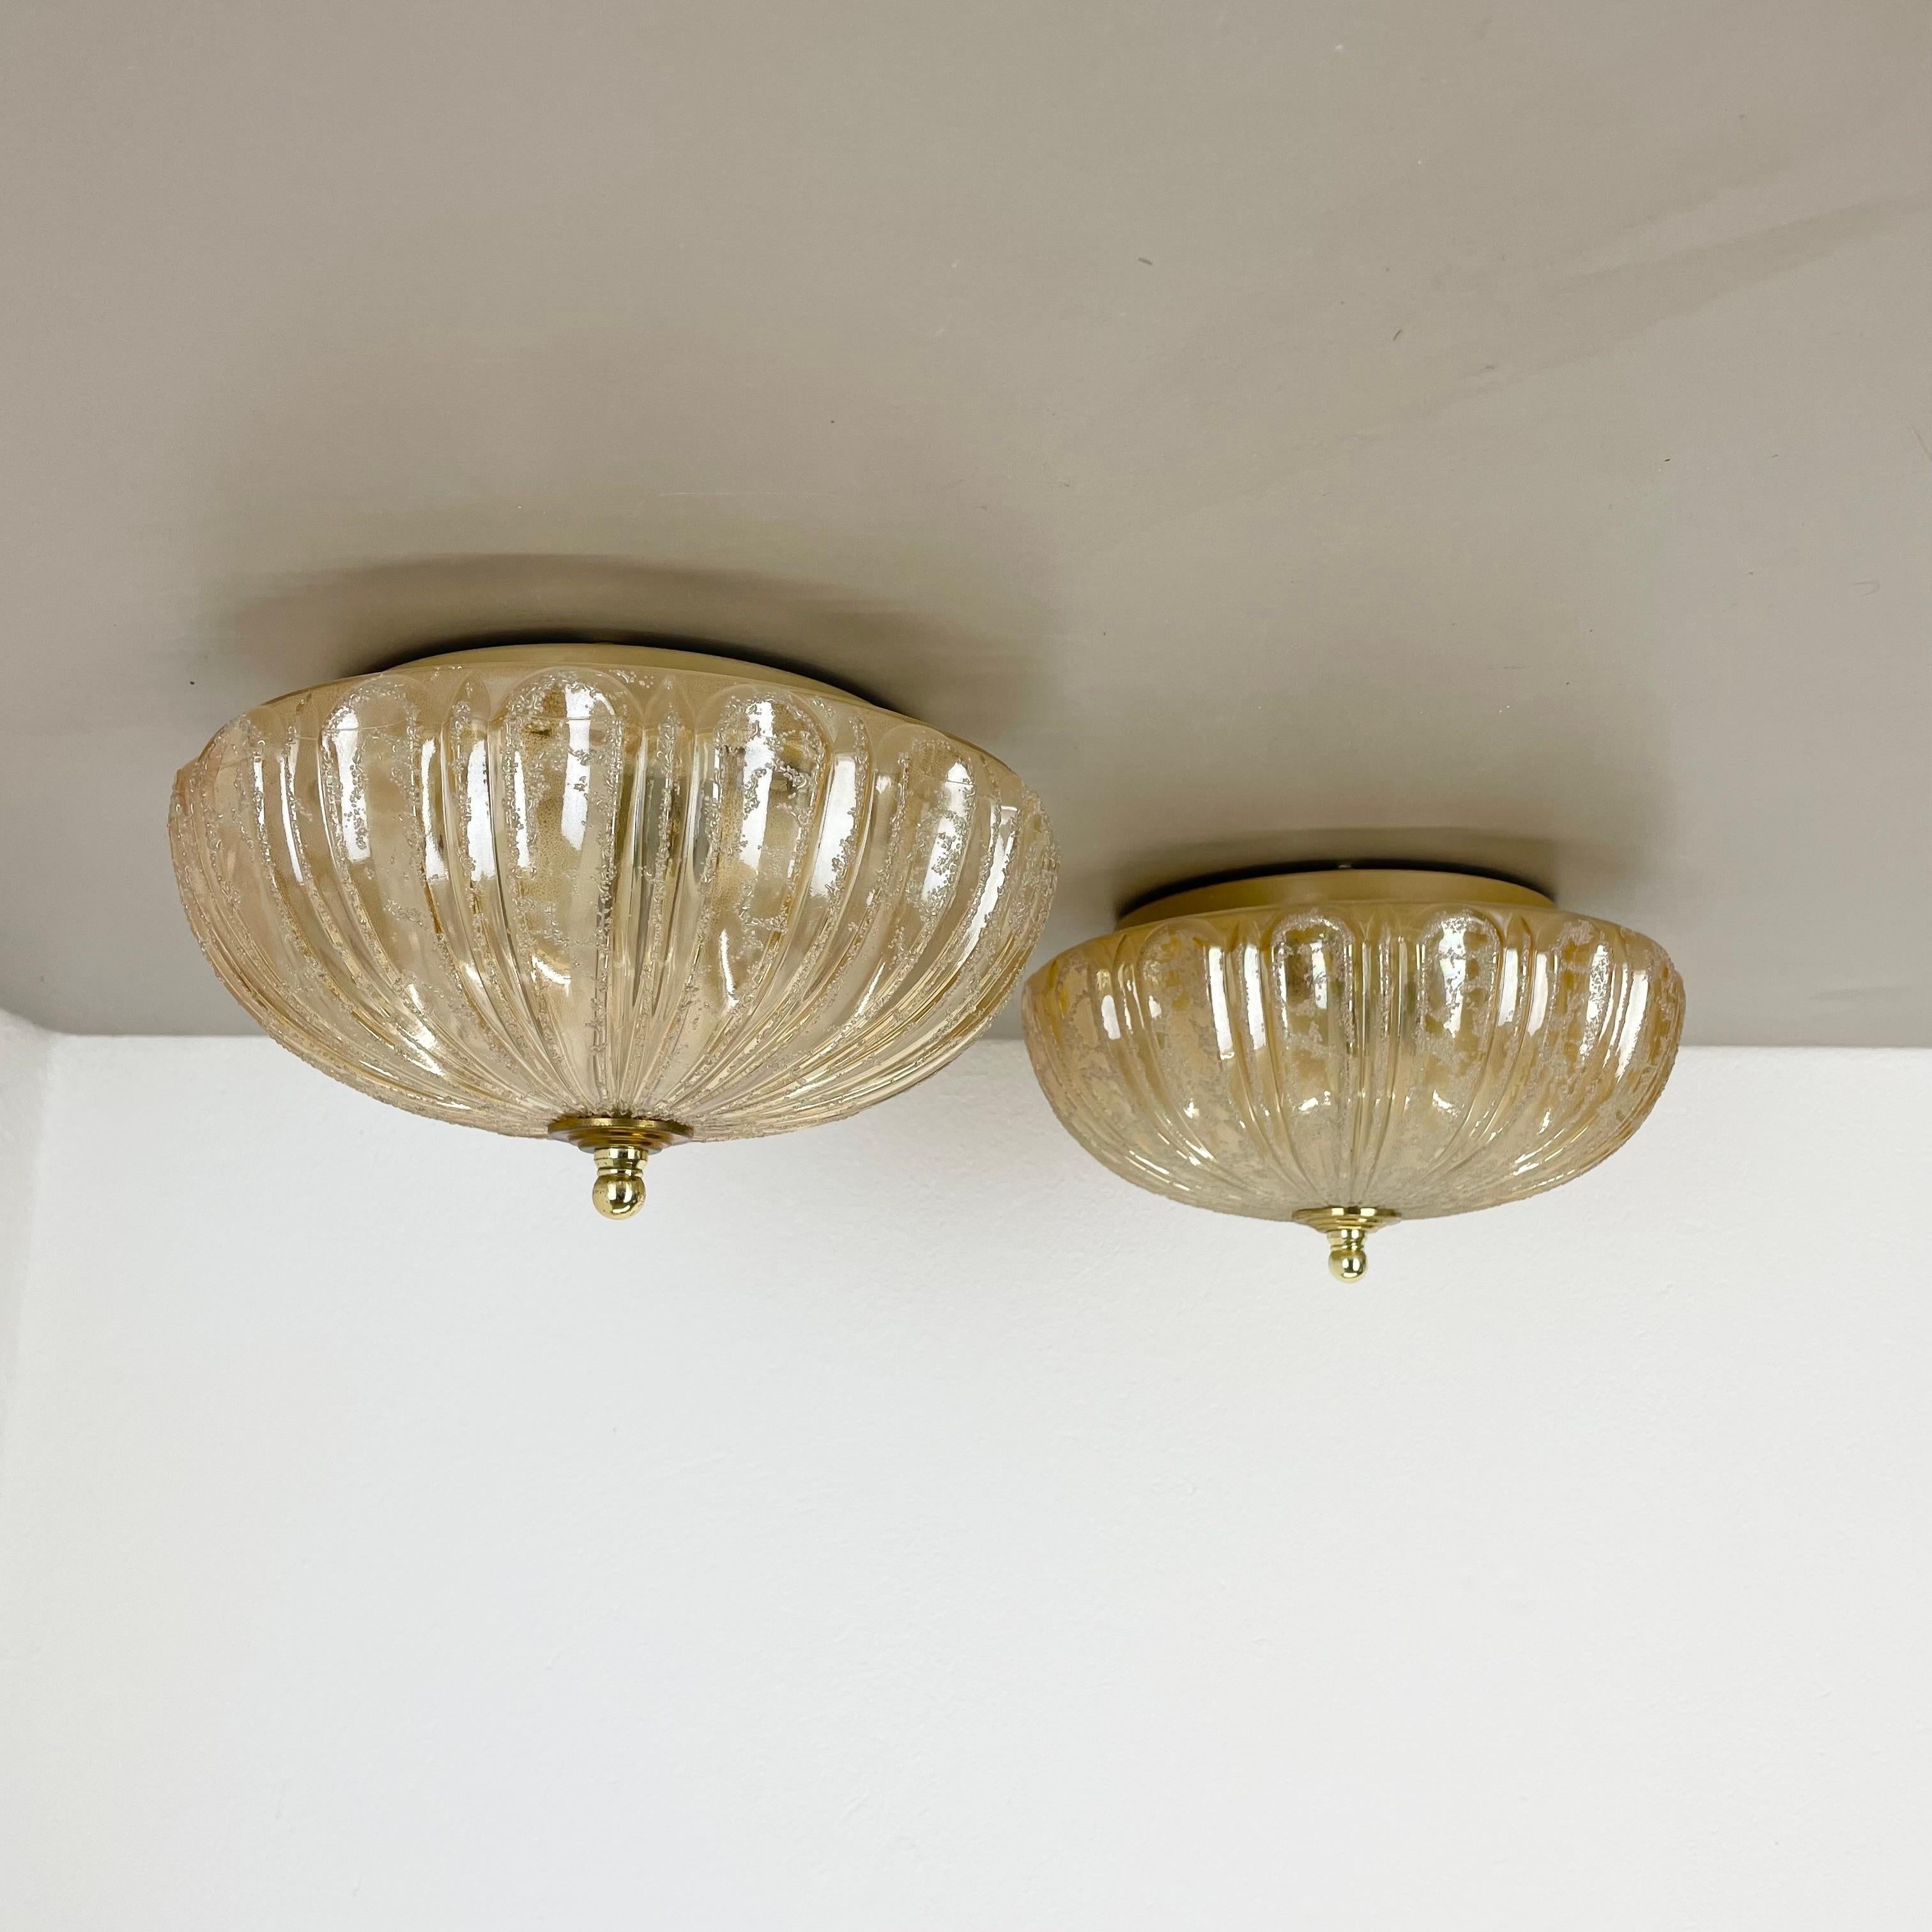 Article:

set of 2 Wall light sconce, also useable as ceiling lights


Origin:

Germany



Age:

1970s



This original modernist wall light set was produced in Germany in the 1970s. It is made from glass and has a metal wall fixation. The lights